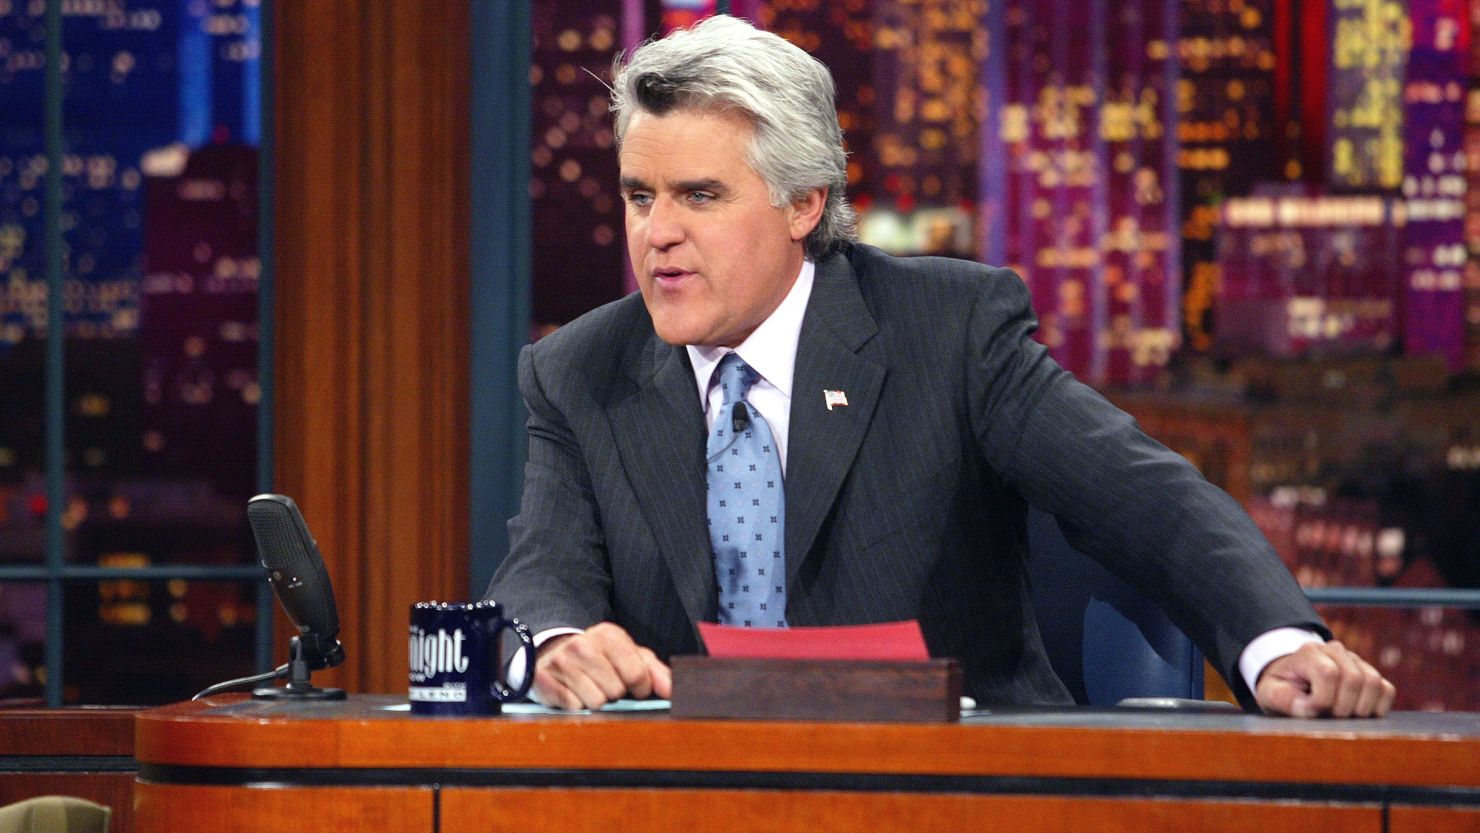 Now that he's out from behind the "Tonight Show" desk, Jay Leno is spending his time giving back to soldiers.